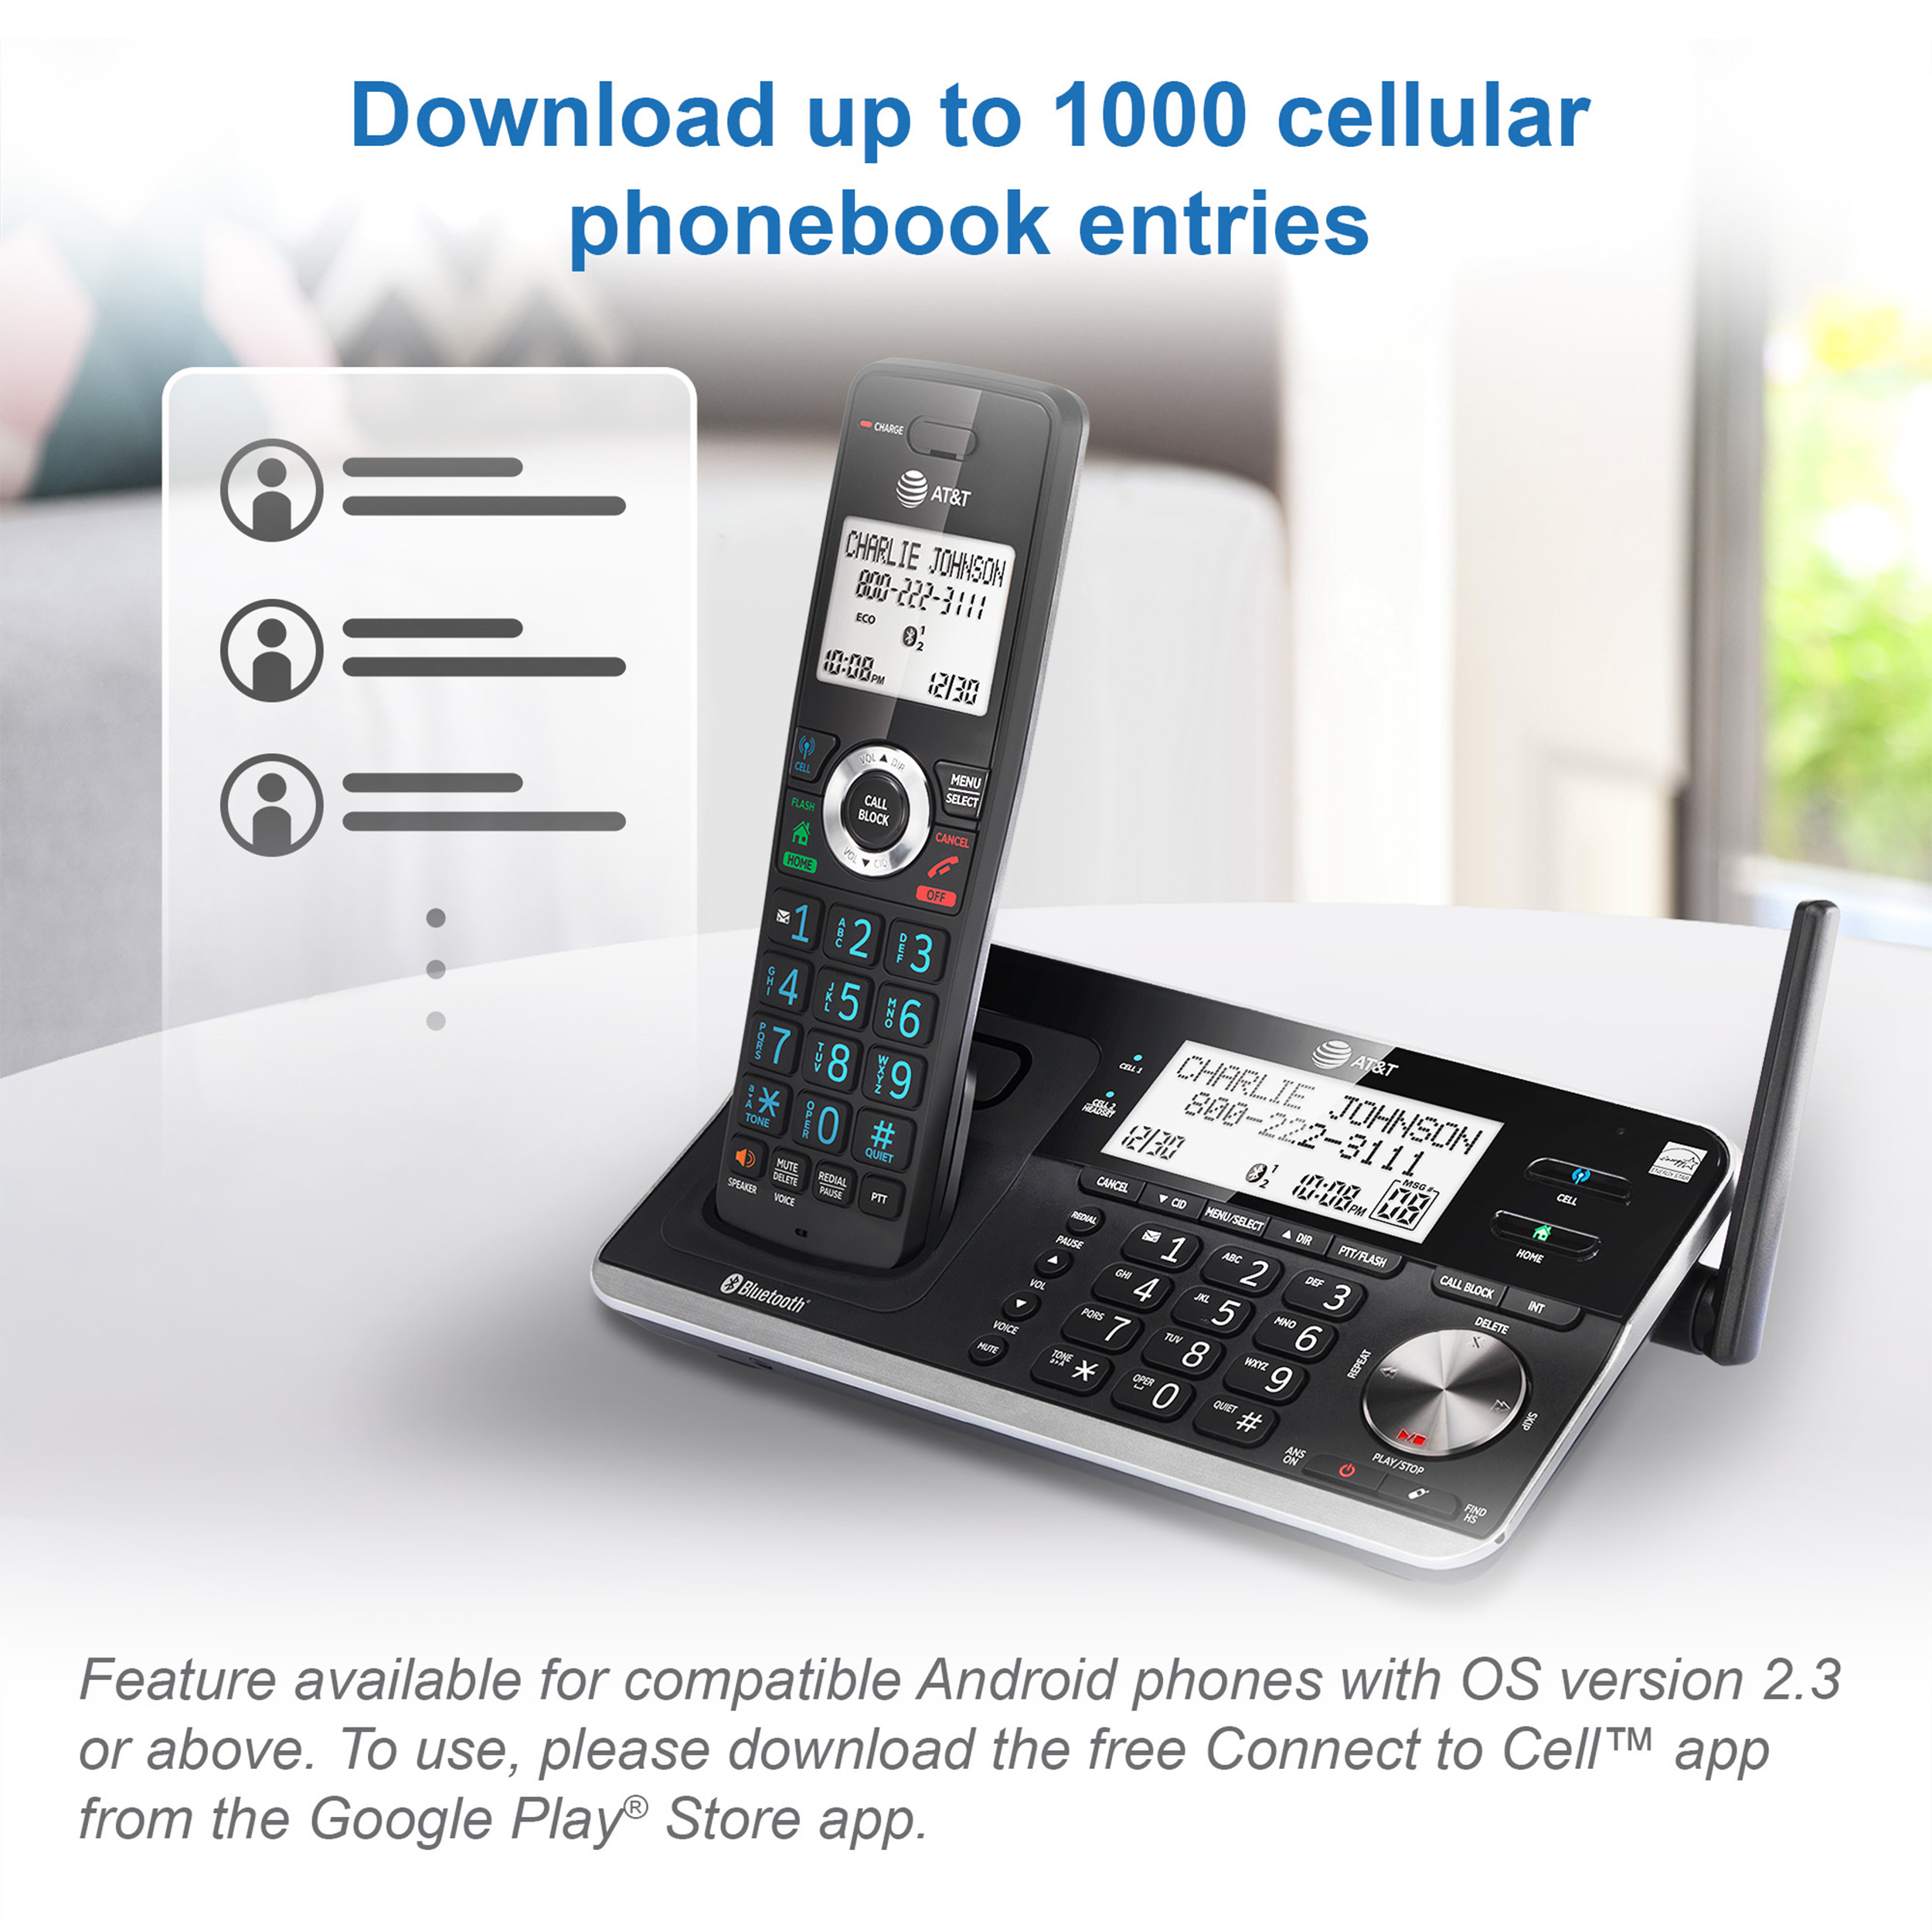 5-Handset Expandable Cordless Phone with Unsurpassed Range, Bluetooth Connect to Cell™, Smart Call Blocker and Answering System, DLP73510 - view 6